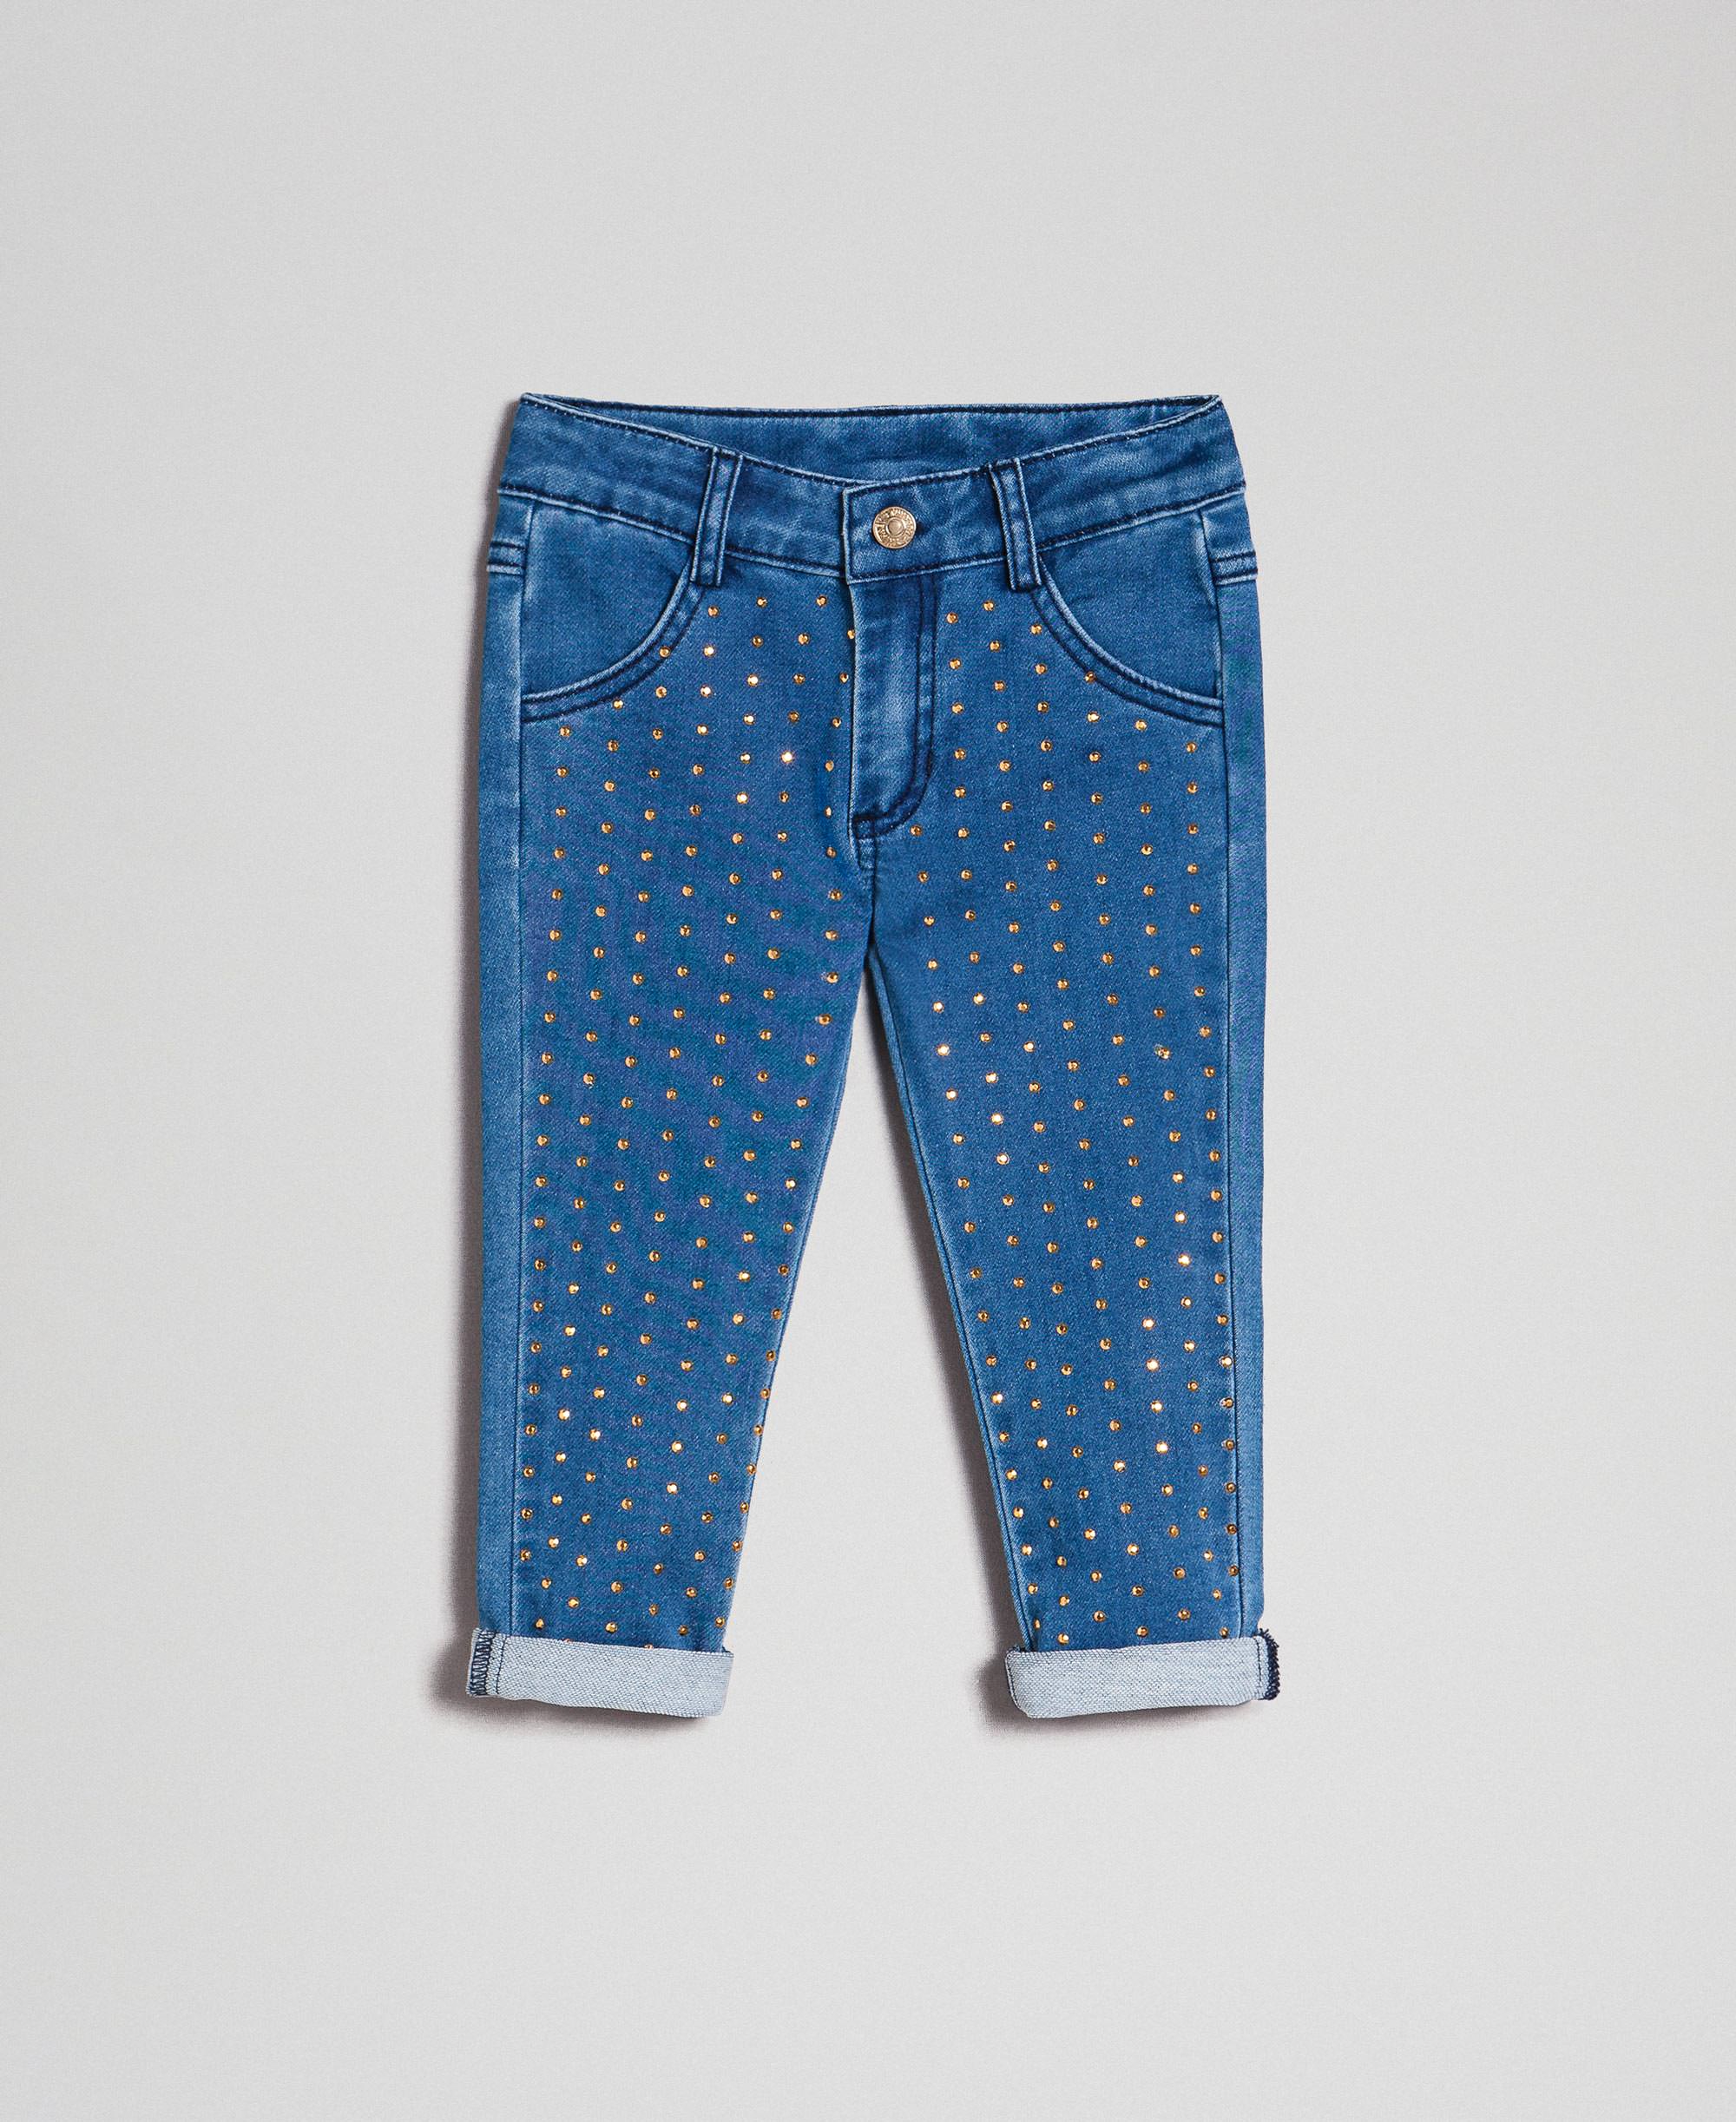 Jeans effect skinny trousers with studs